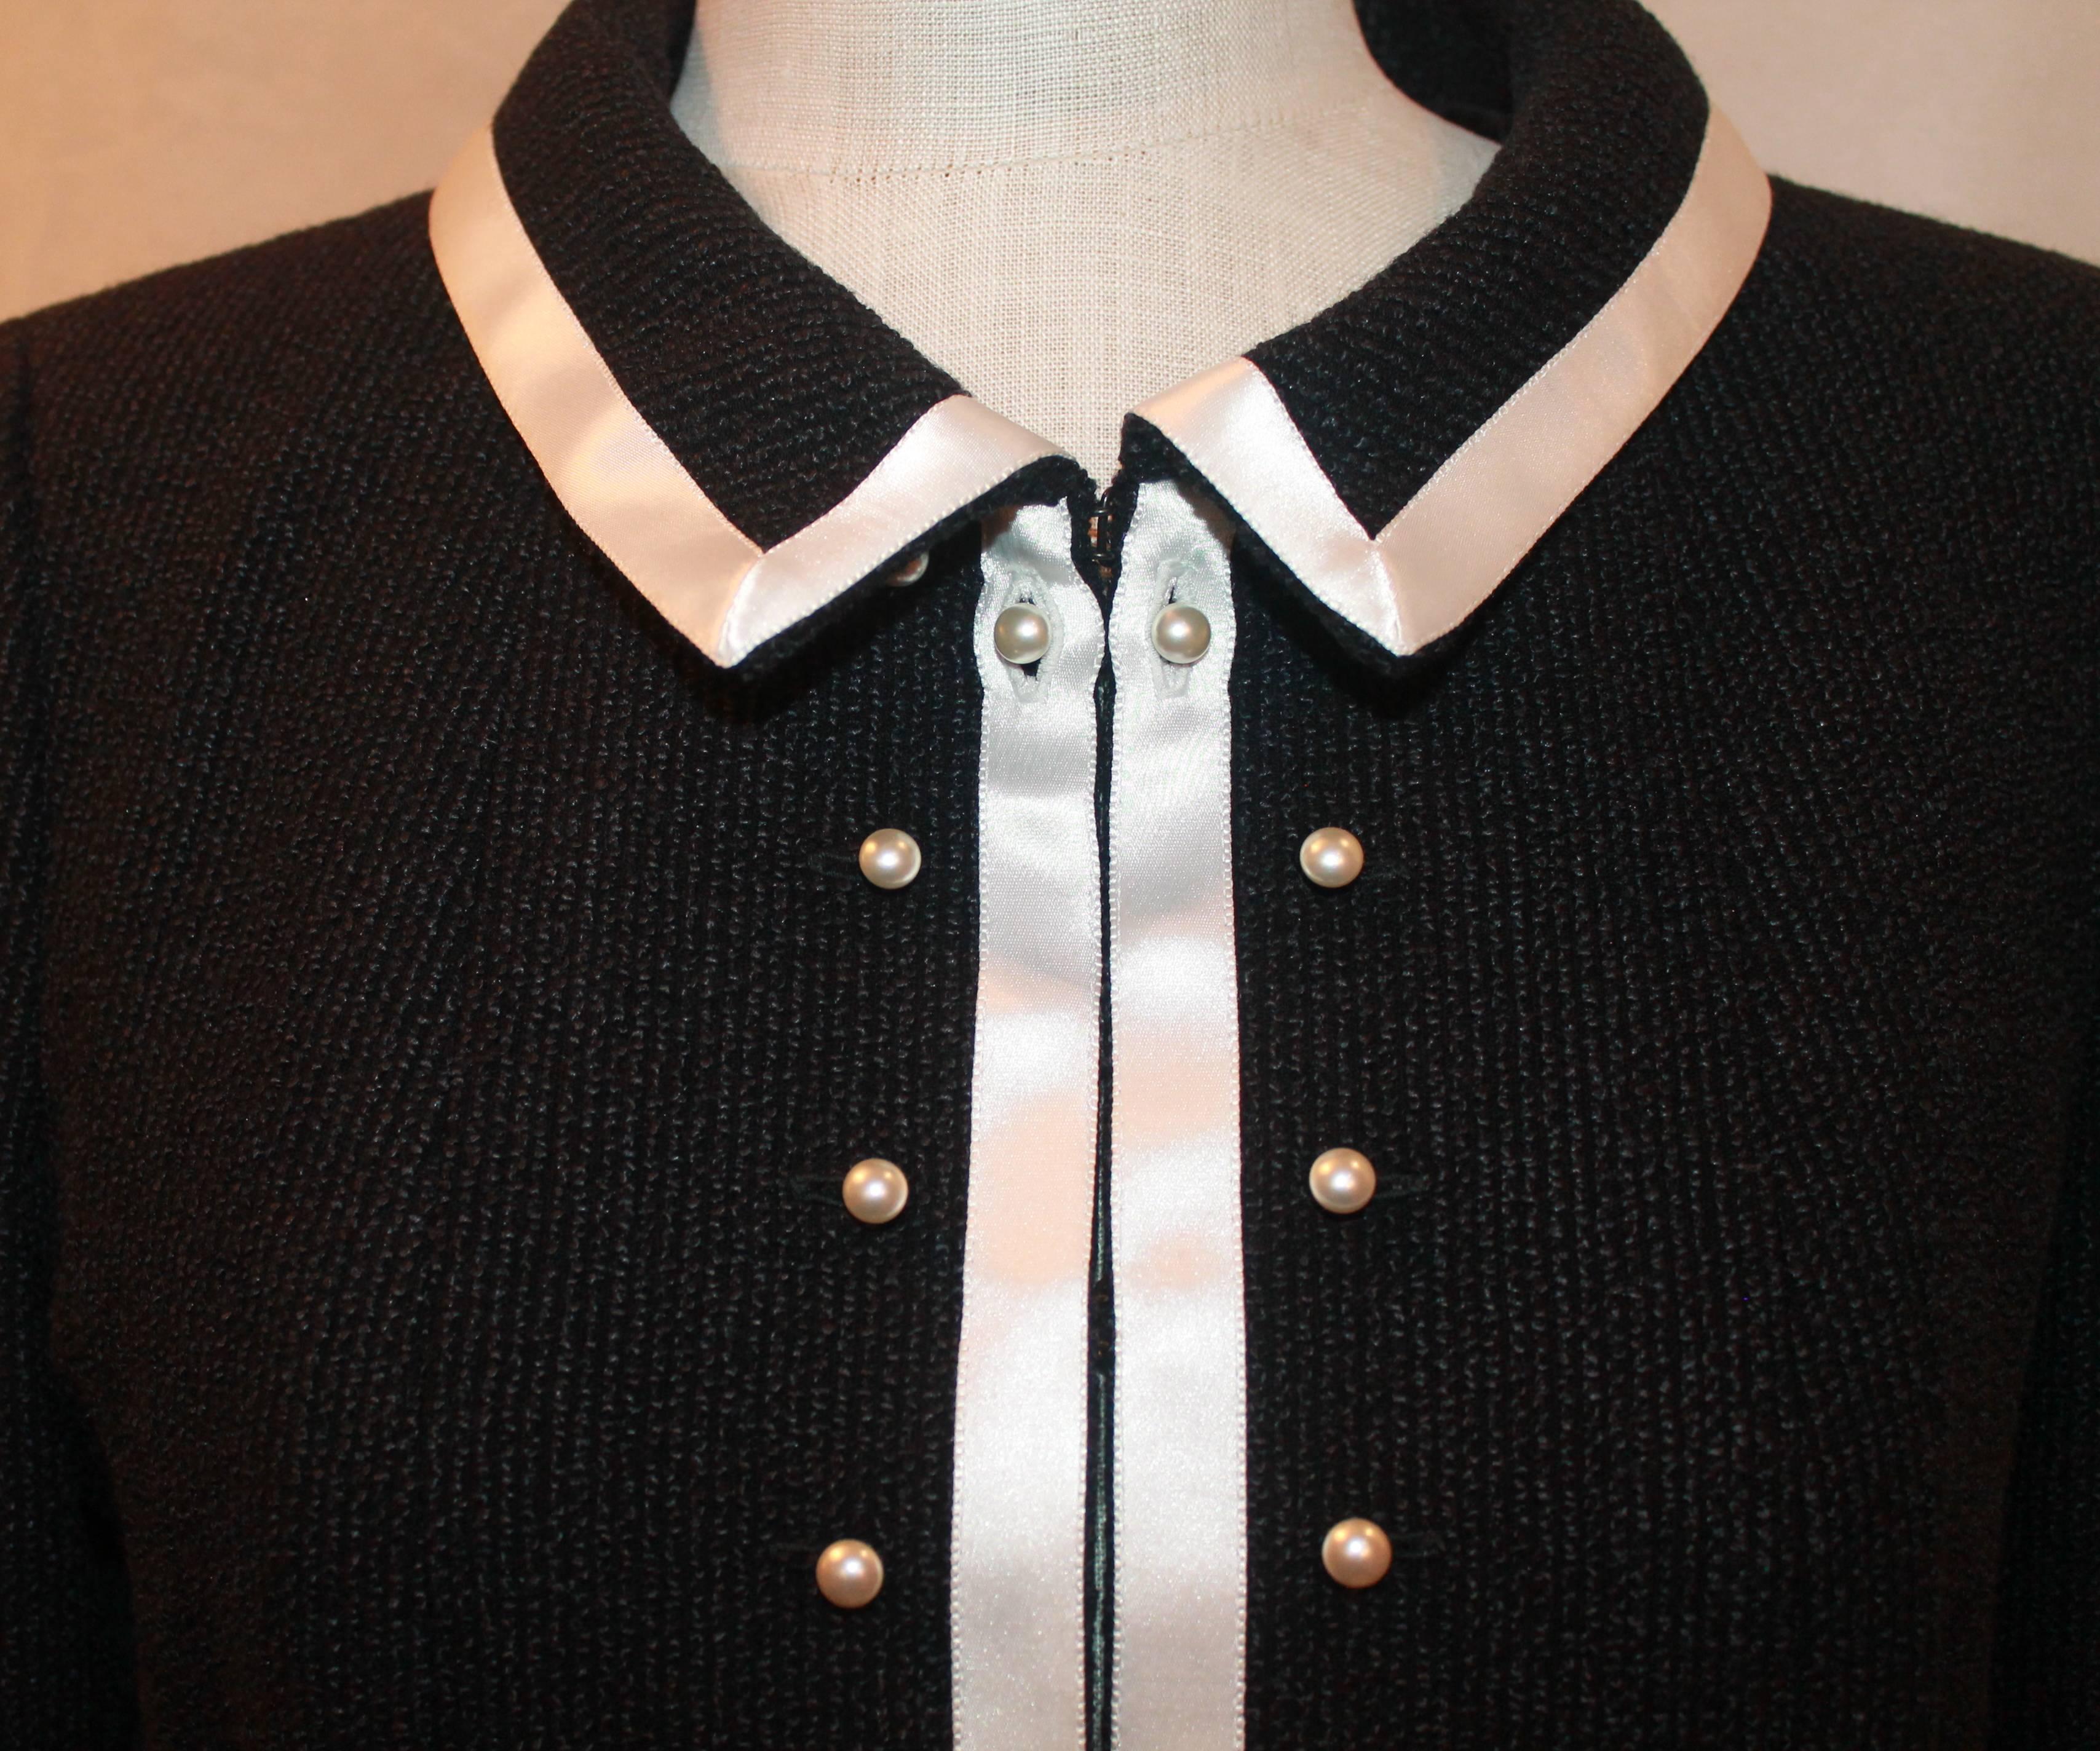 2004 Chanel Black 4-Pocket Jacket with White Ribbon Trim and Pearls - 40 In Excellent Condition In West Palm Beach, FL